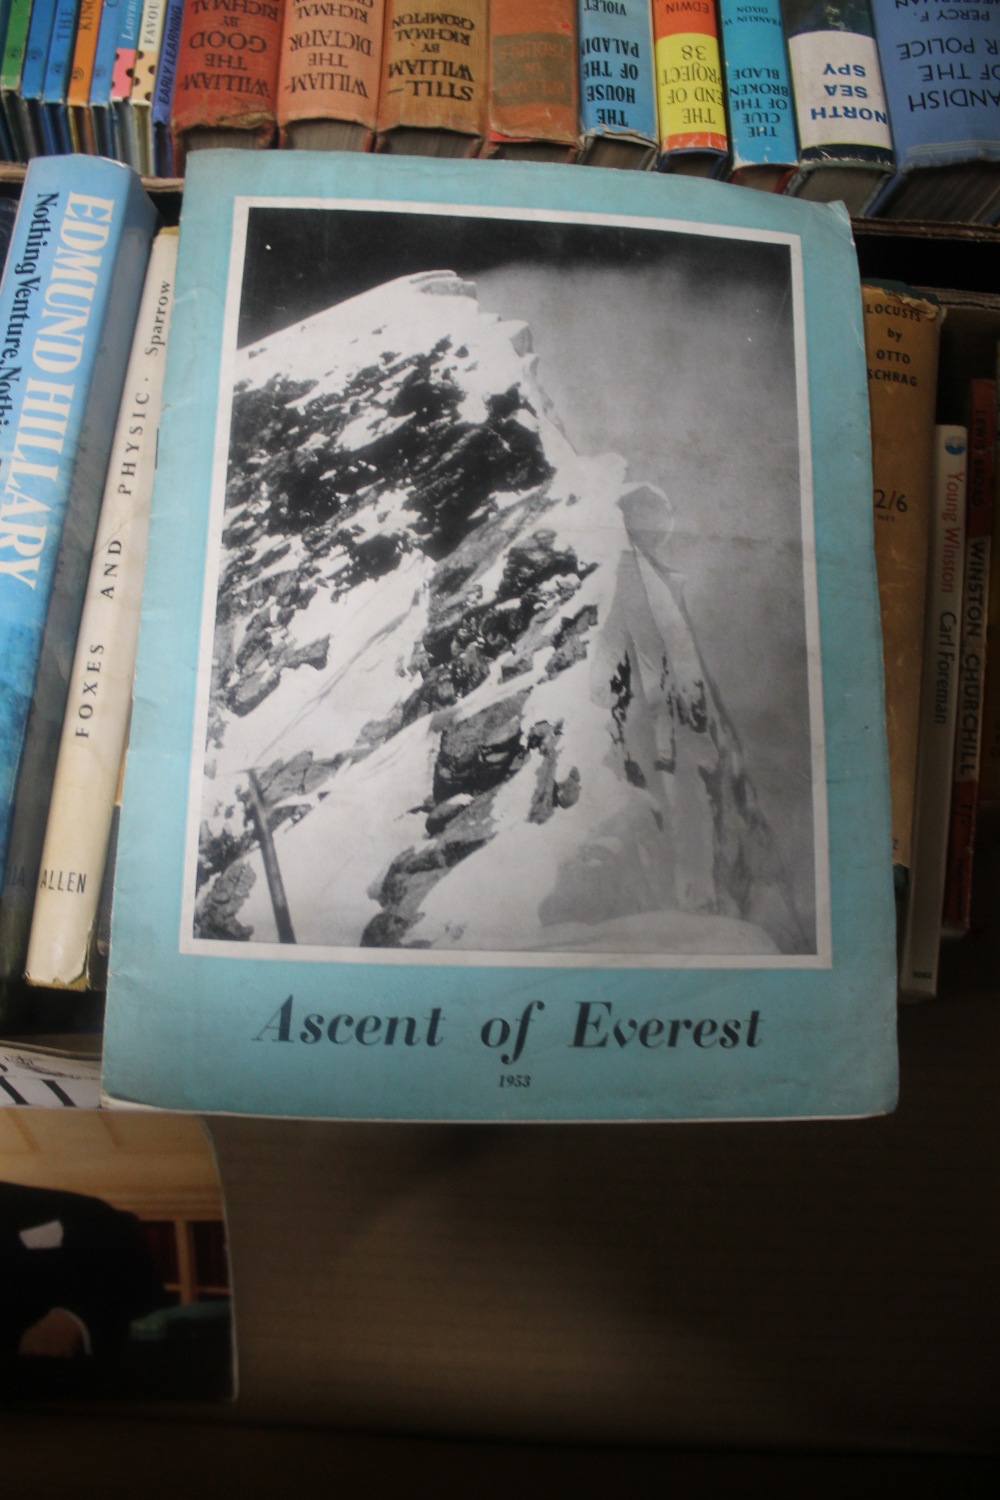 A TRAY OF MISCELLANEOUS BOOKS TO INCLUDE CHURCHILL INTEREST AND A BOOKLET OF 'THE ASCENT OF EVEREST' - Image 2 of 3